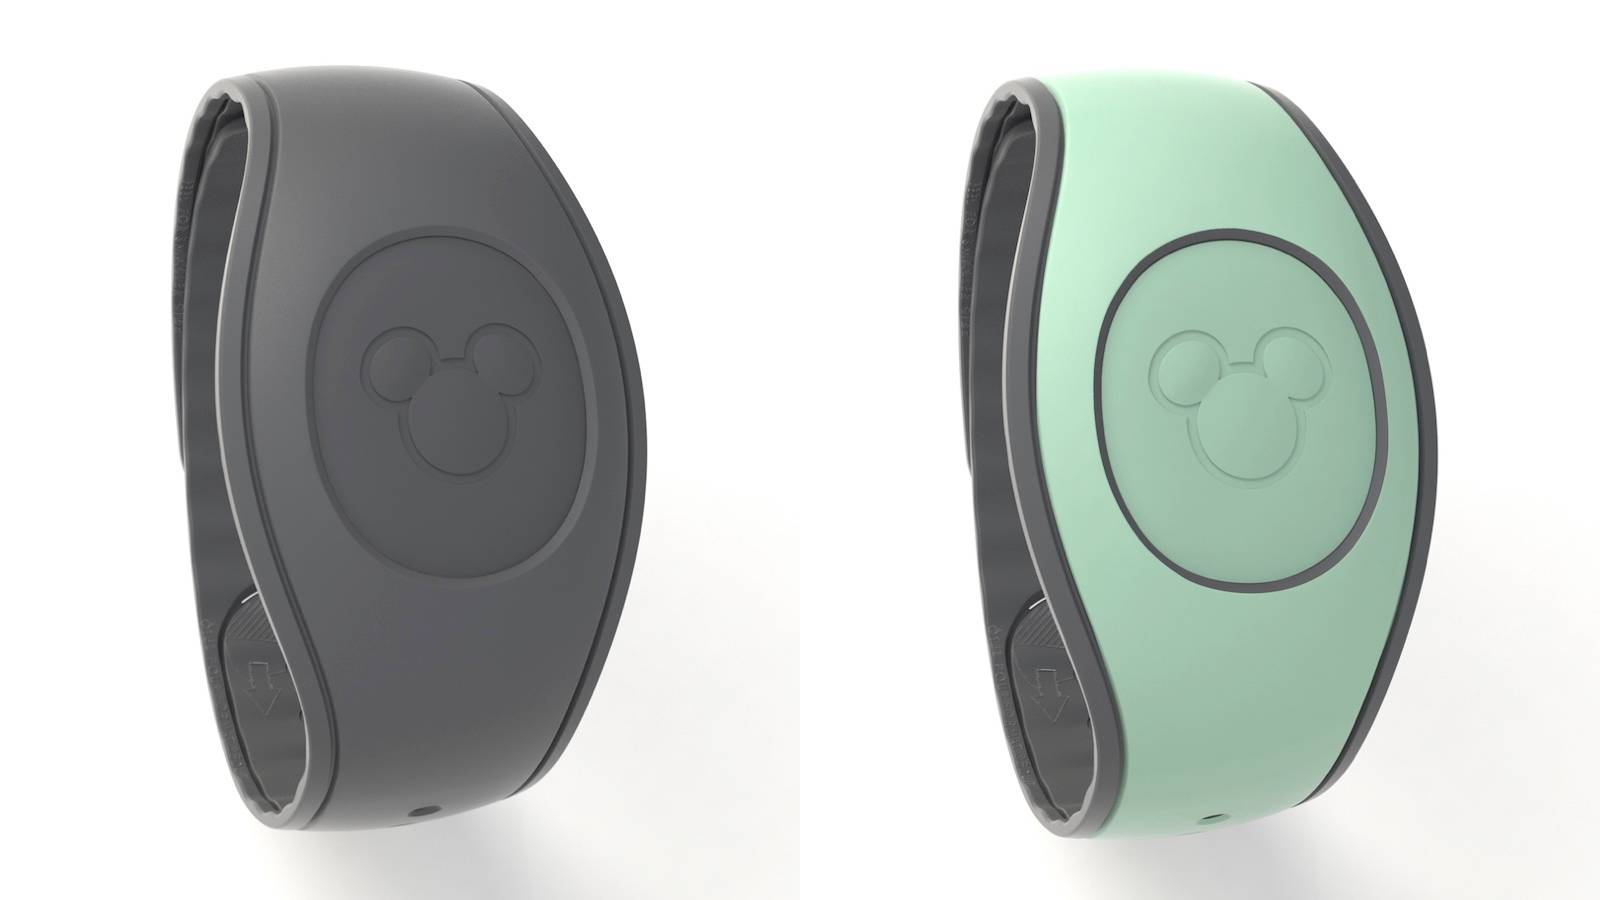 PHOTOS - Dark Gray and Mint Green MagicBands coming to Walt Disney World this month